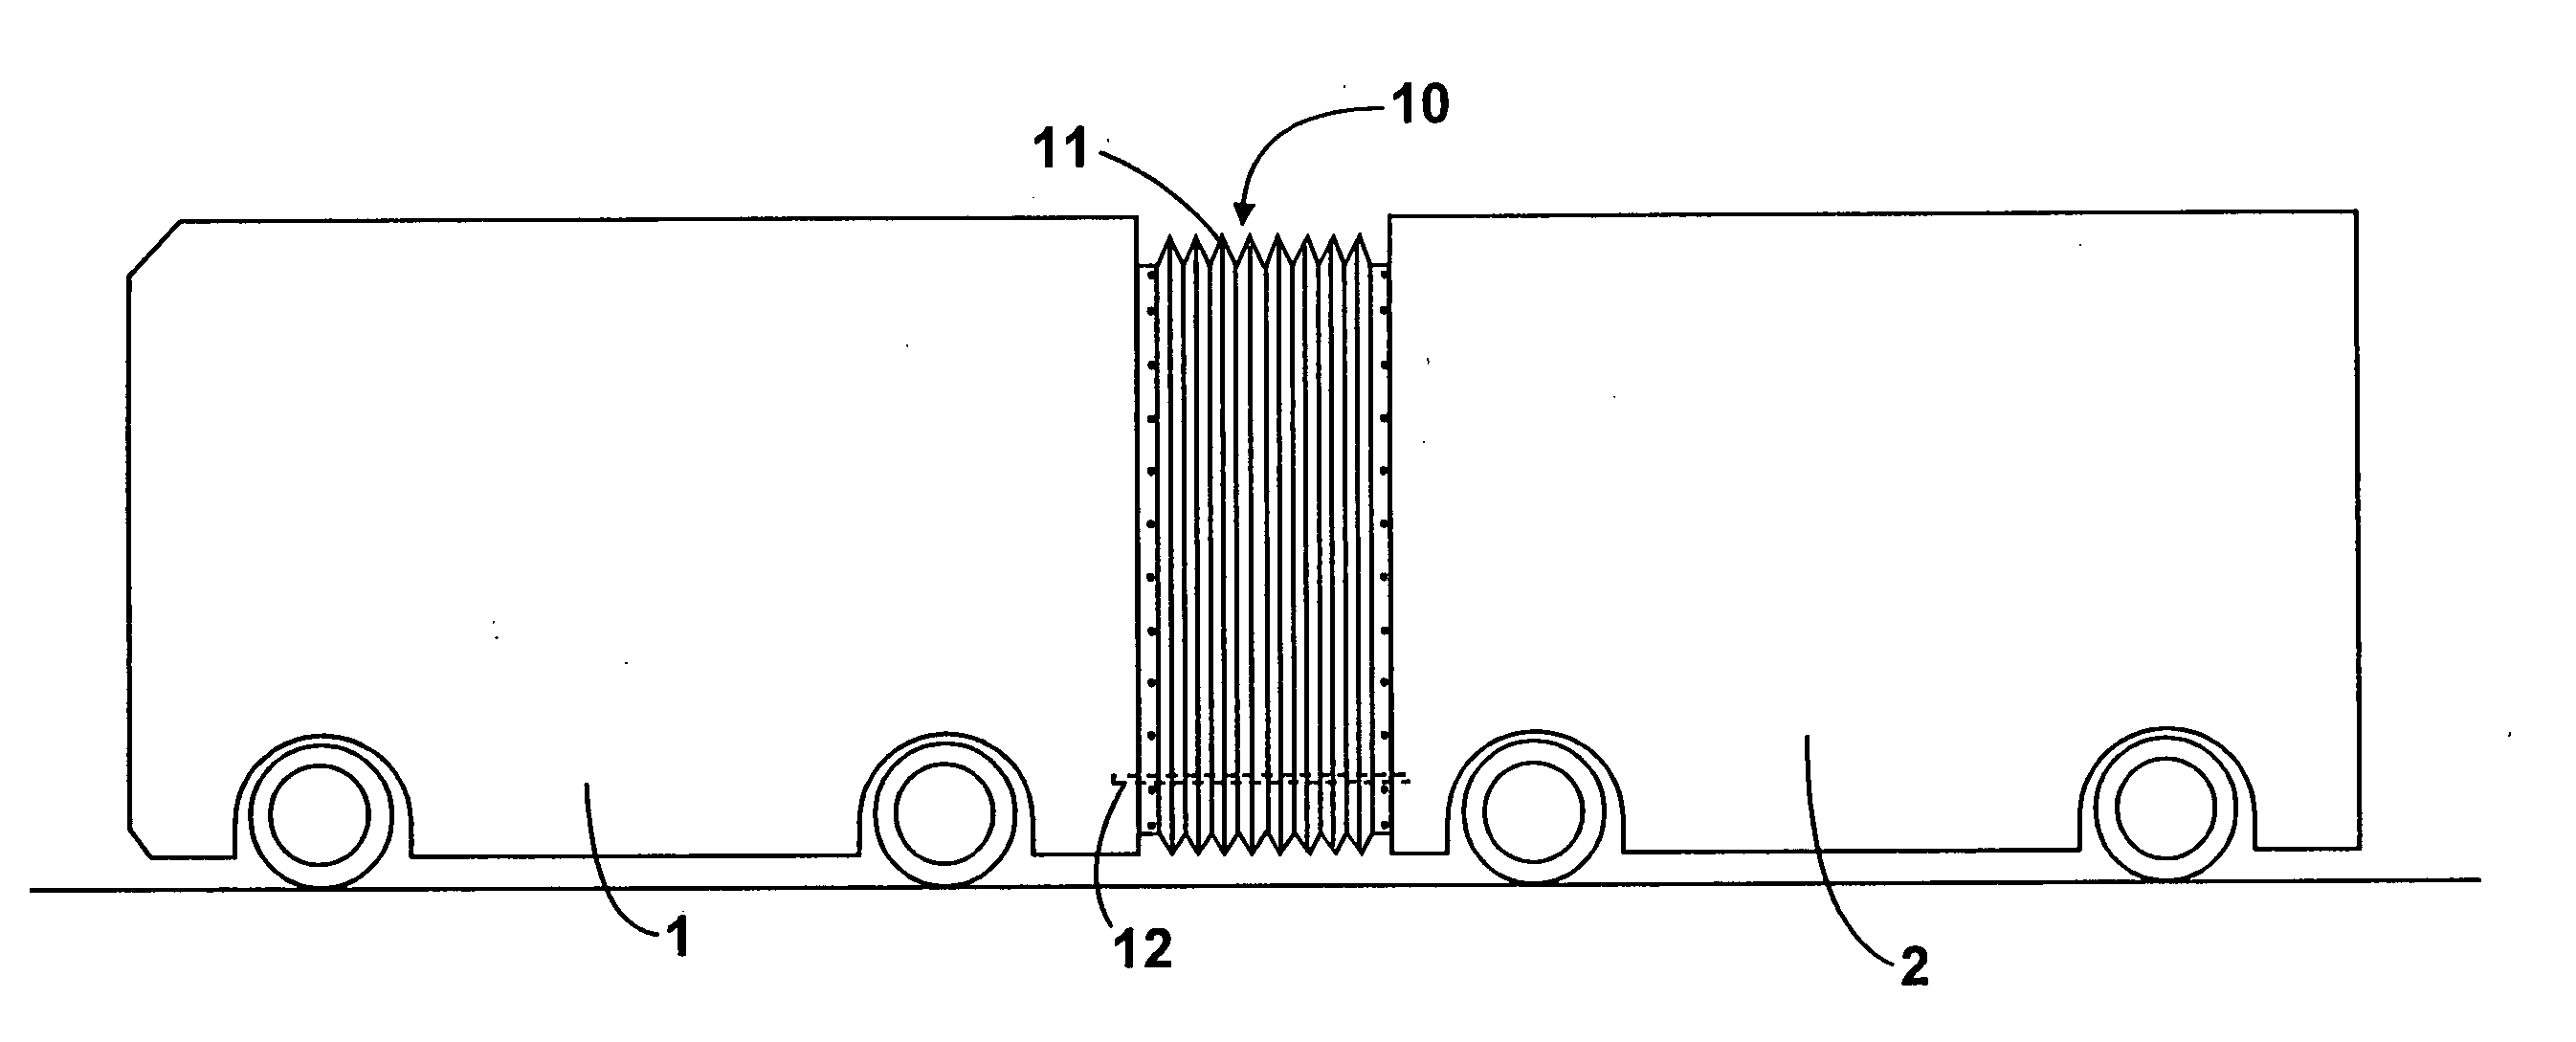 Trailer unit with a trailer, specifically a double axle trailer